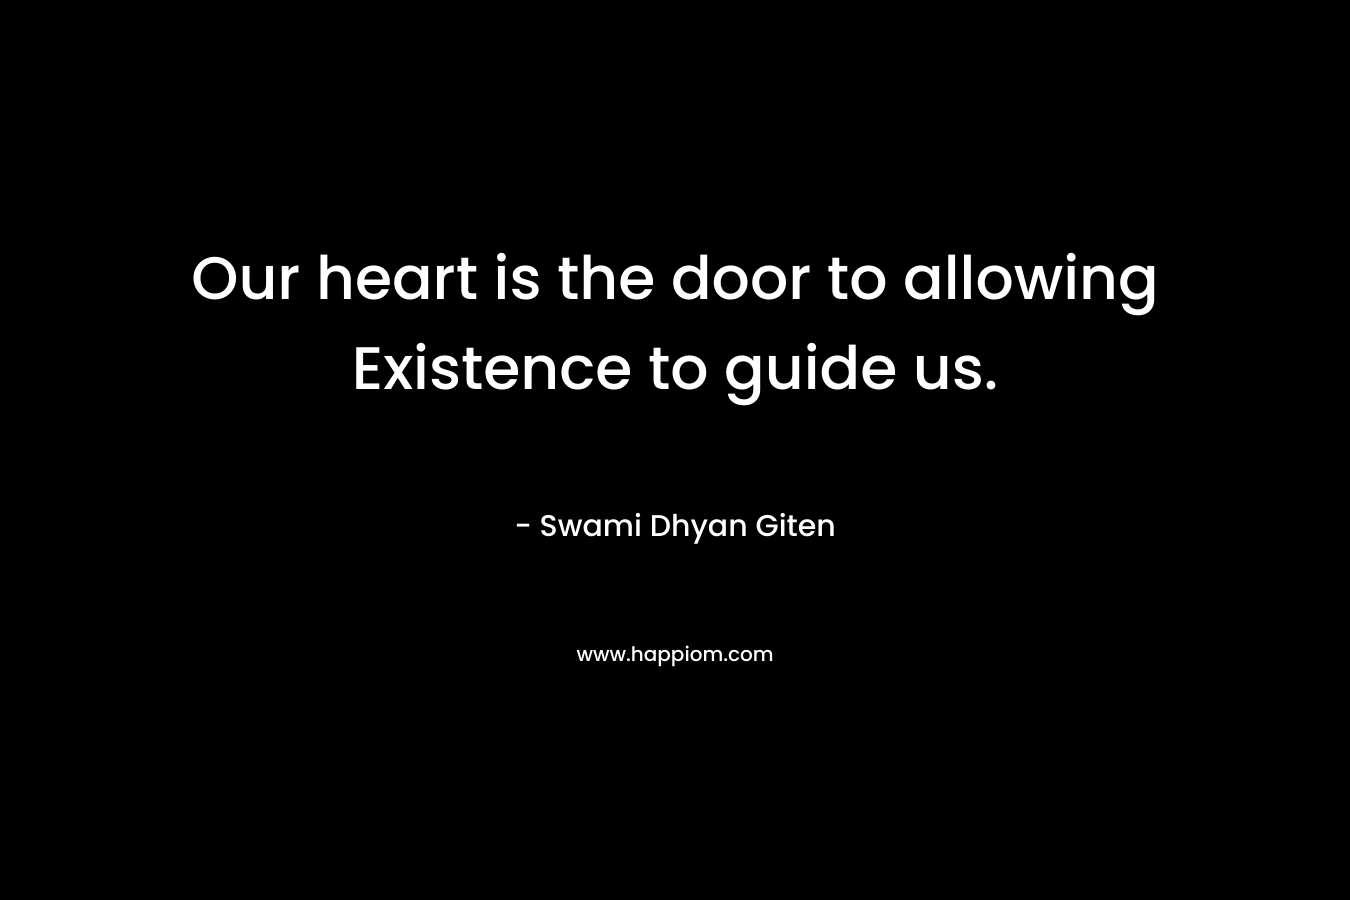 Our heart is the door to allowing Existence to guide us.